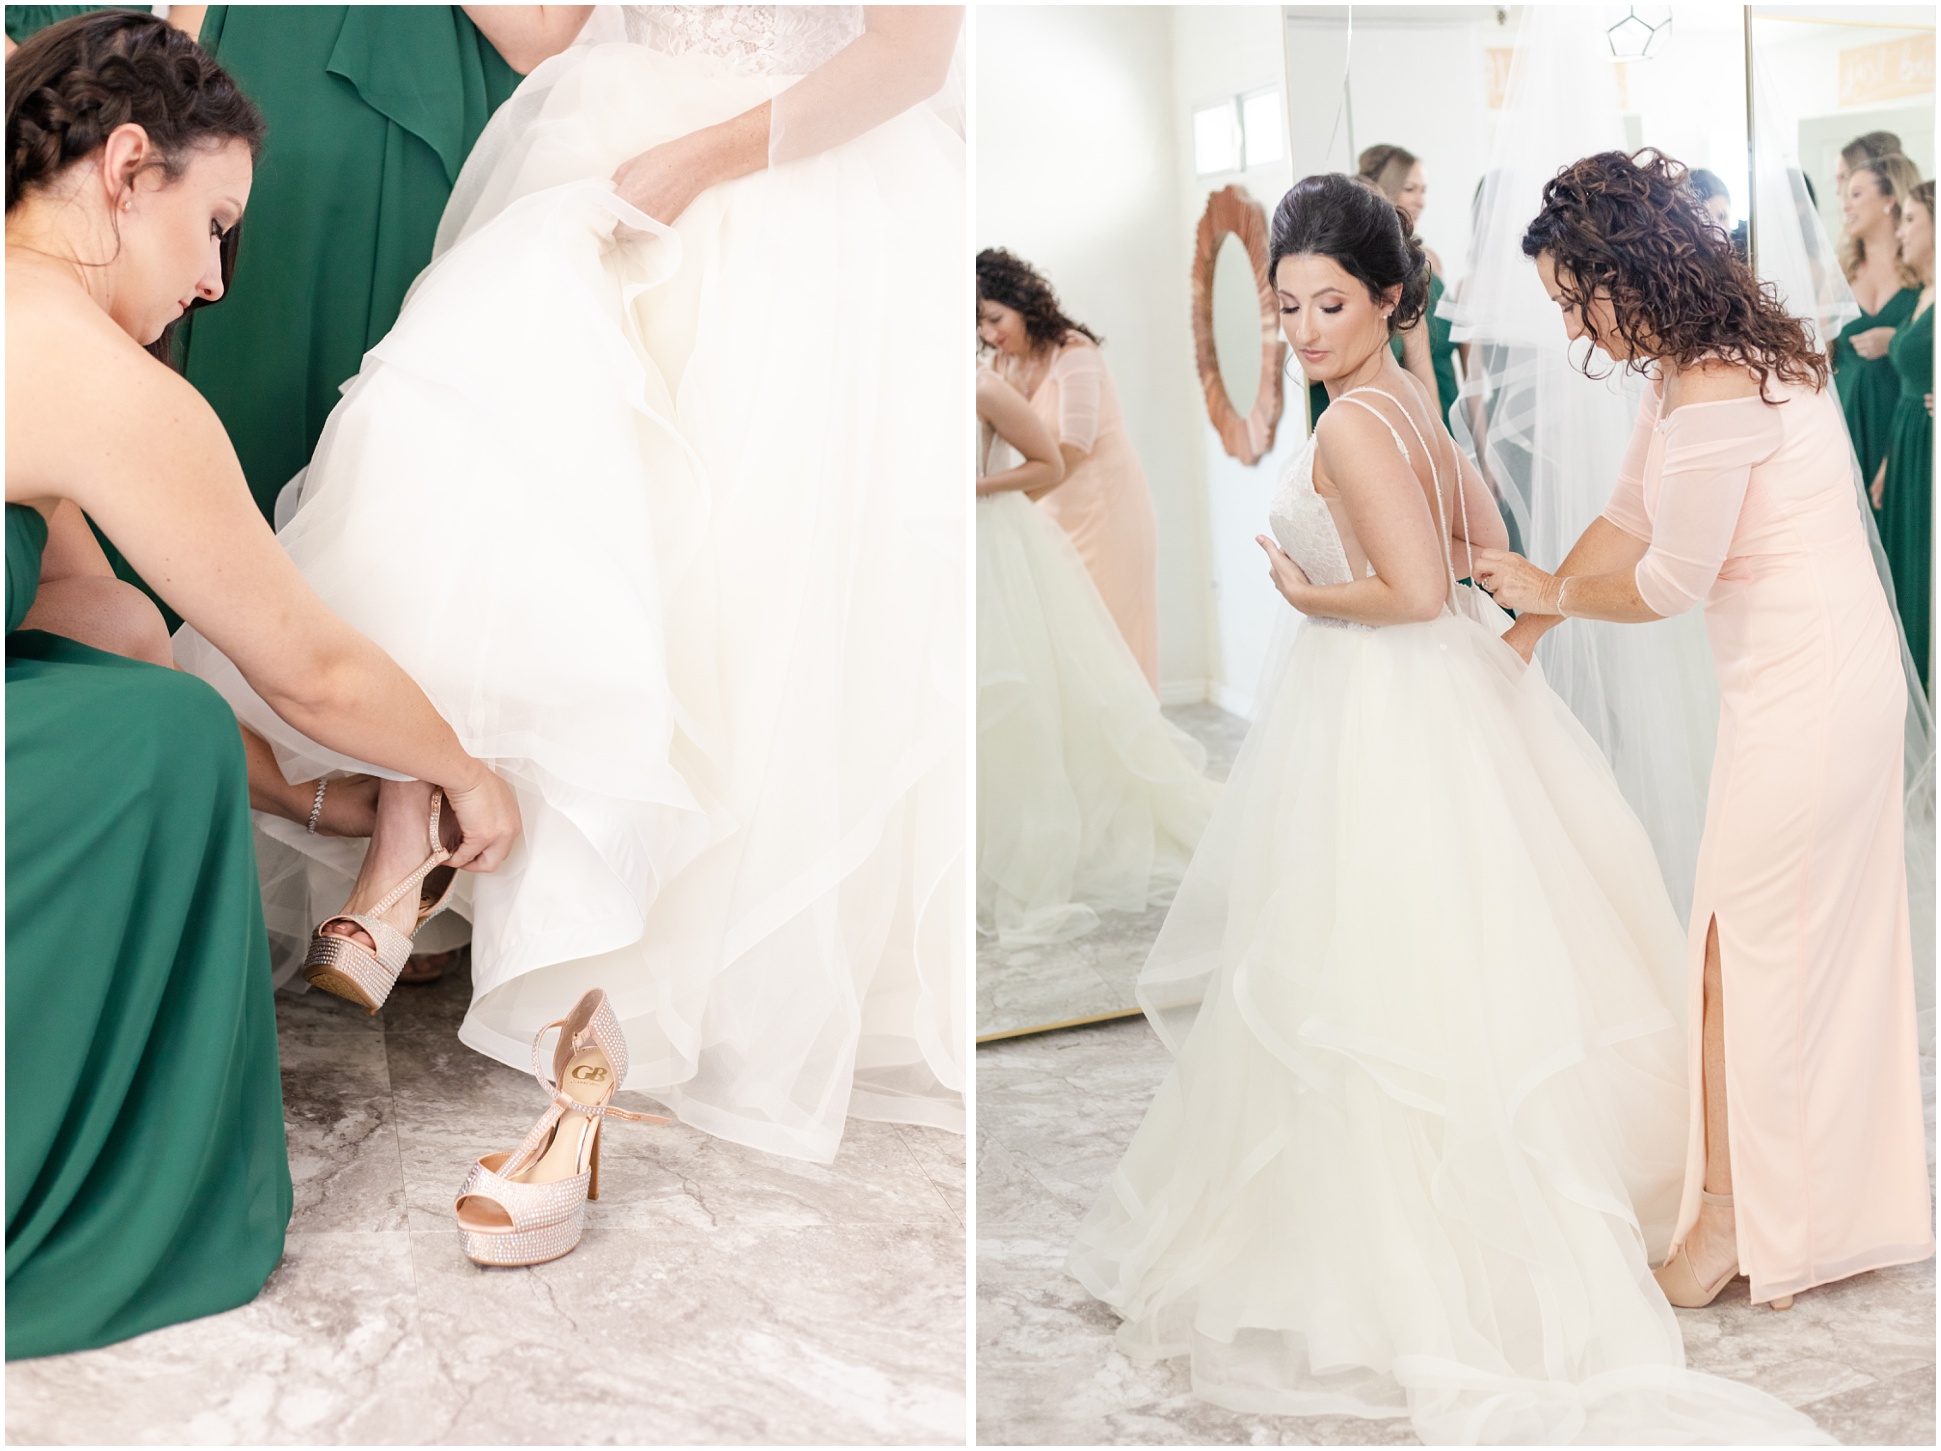 Bridesmaid helping bride put on champagne heels, mother zipping up brides dress